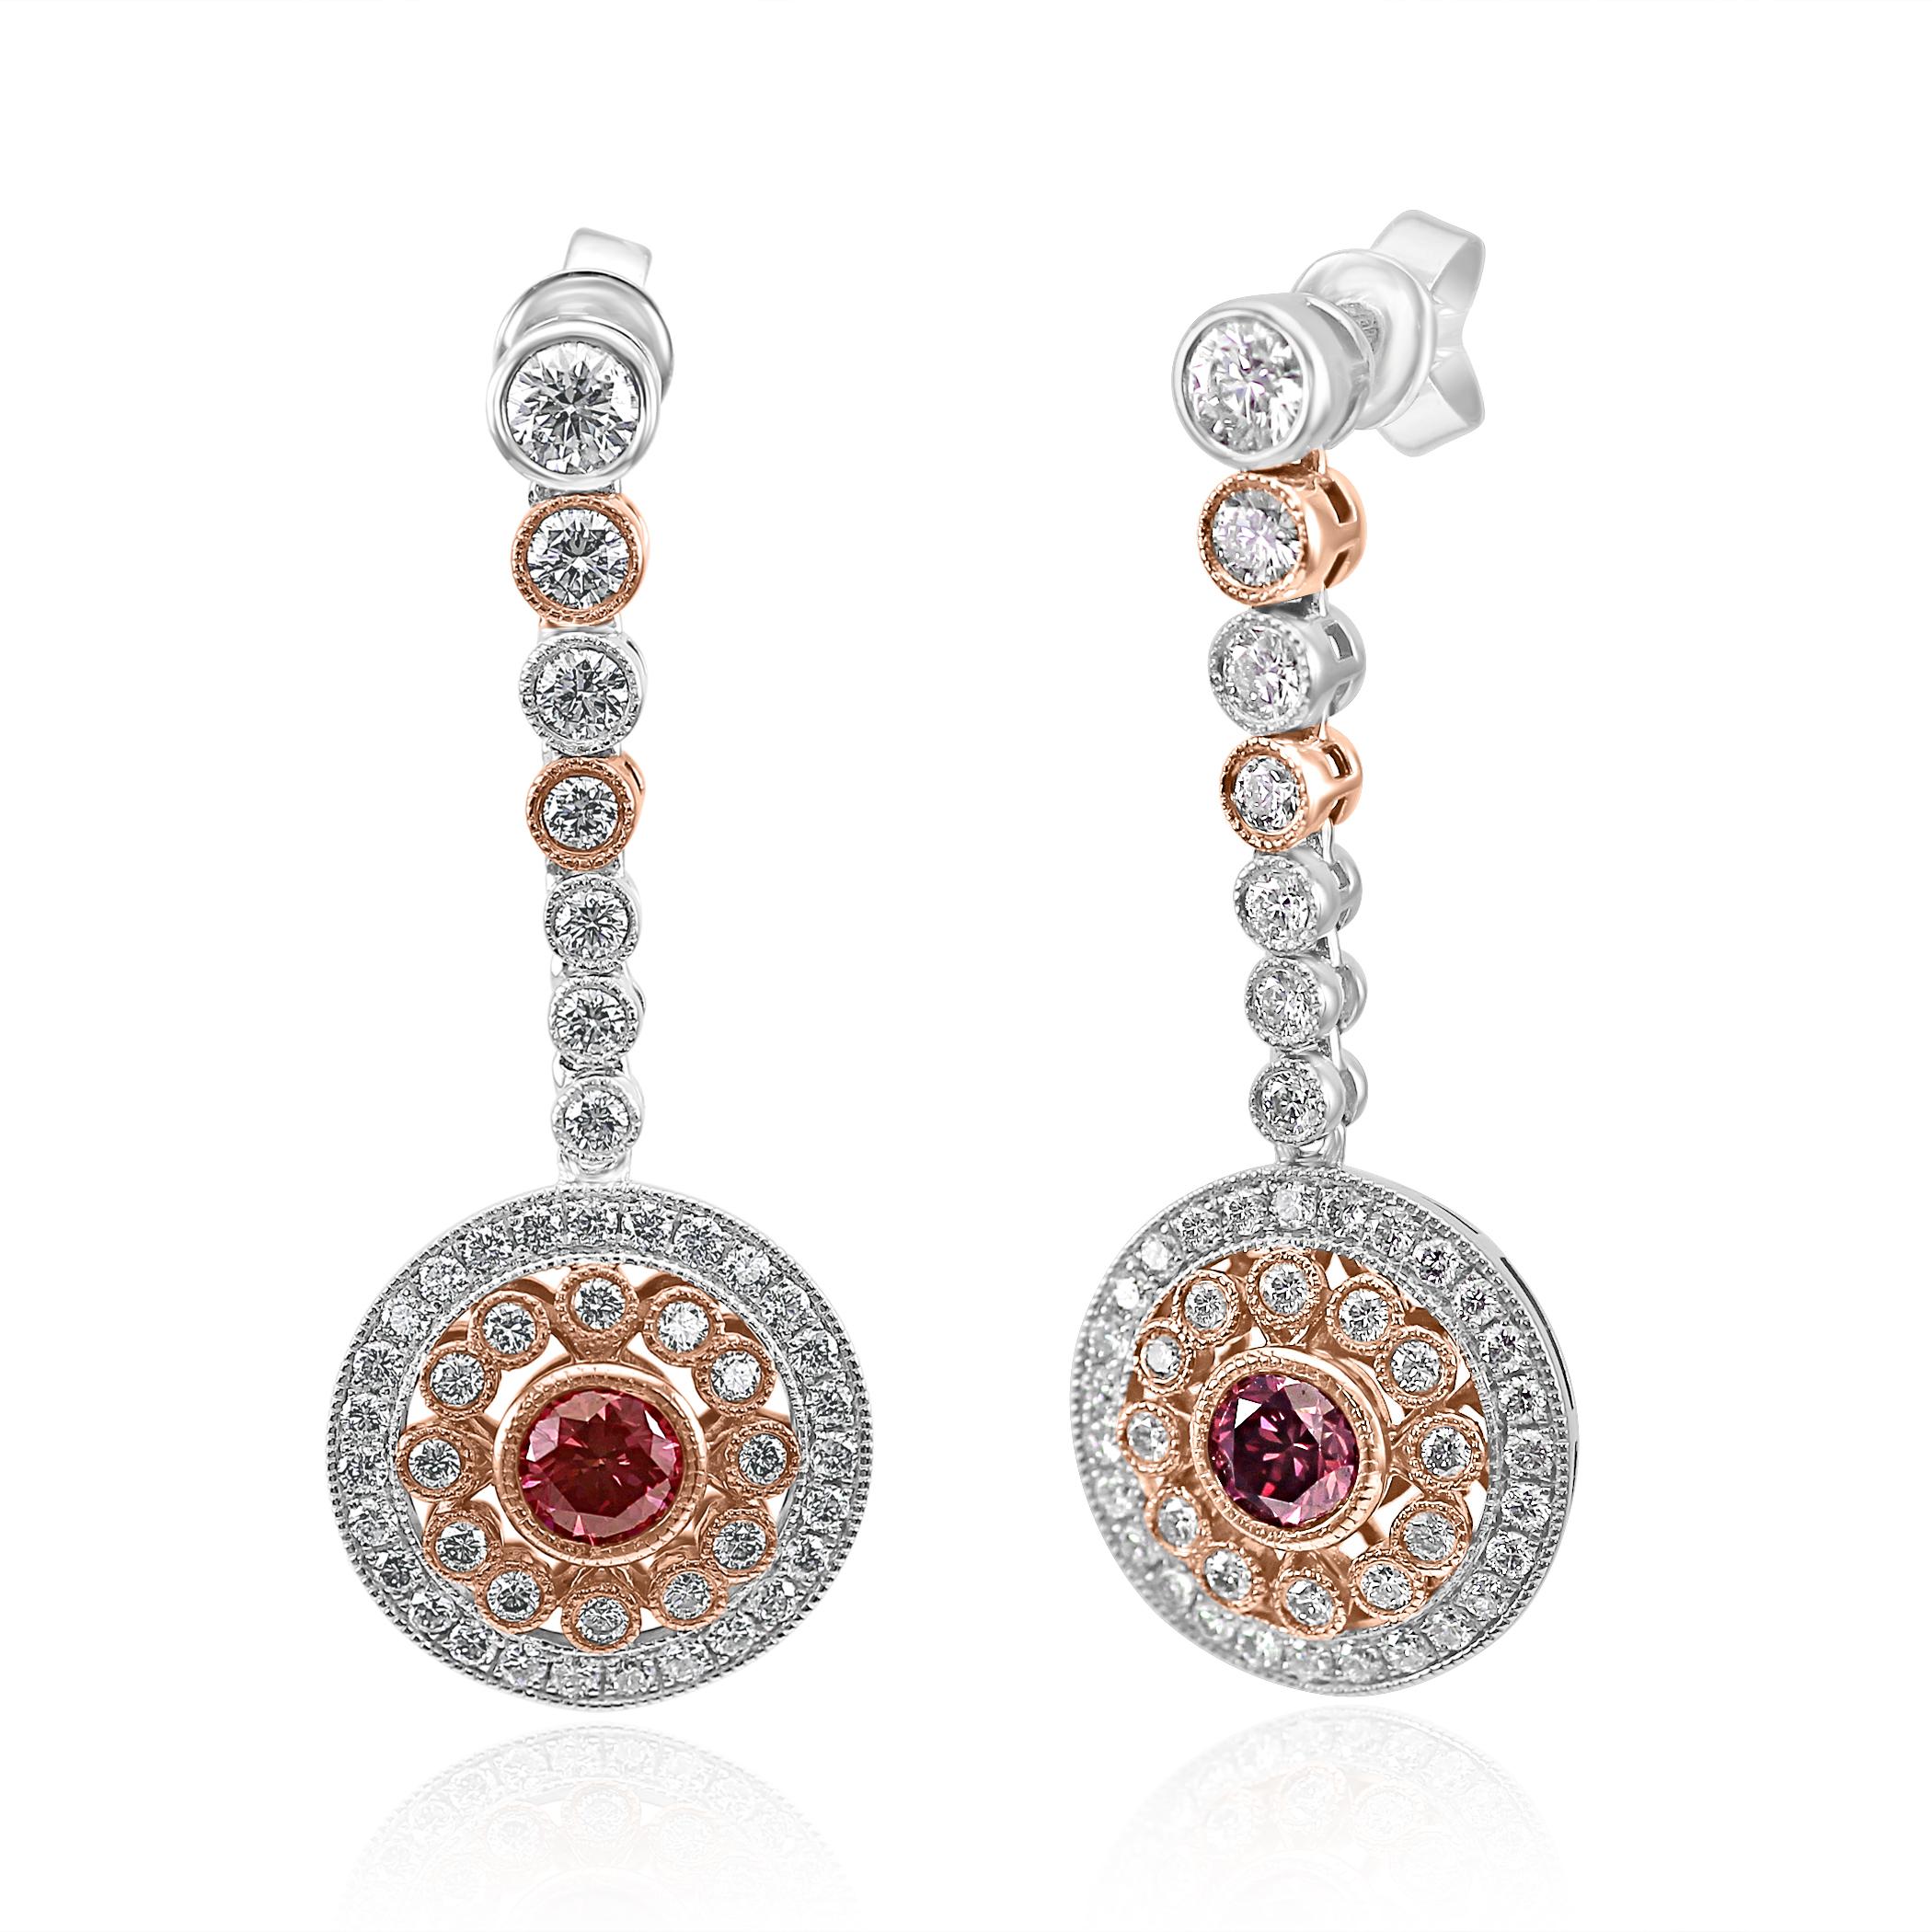 Gorgeous HPHT Vivid Pink Diamond Round VS-SI Clarity 0.79 Carat encircled in Double Halo of 92 White G-H Color VS-SI Clarity Round Diamond 2.01 Carat  in 18K White and Rose Gold Dangle Drop Earing with Filigree Work.

Total Weight 2.80